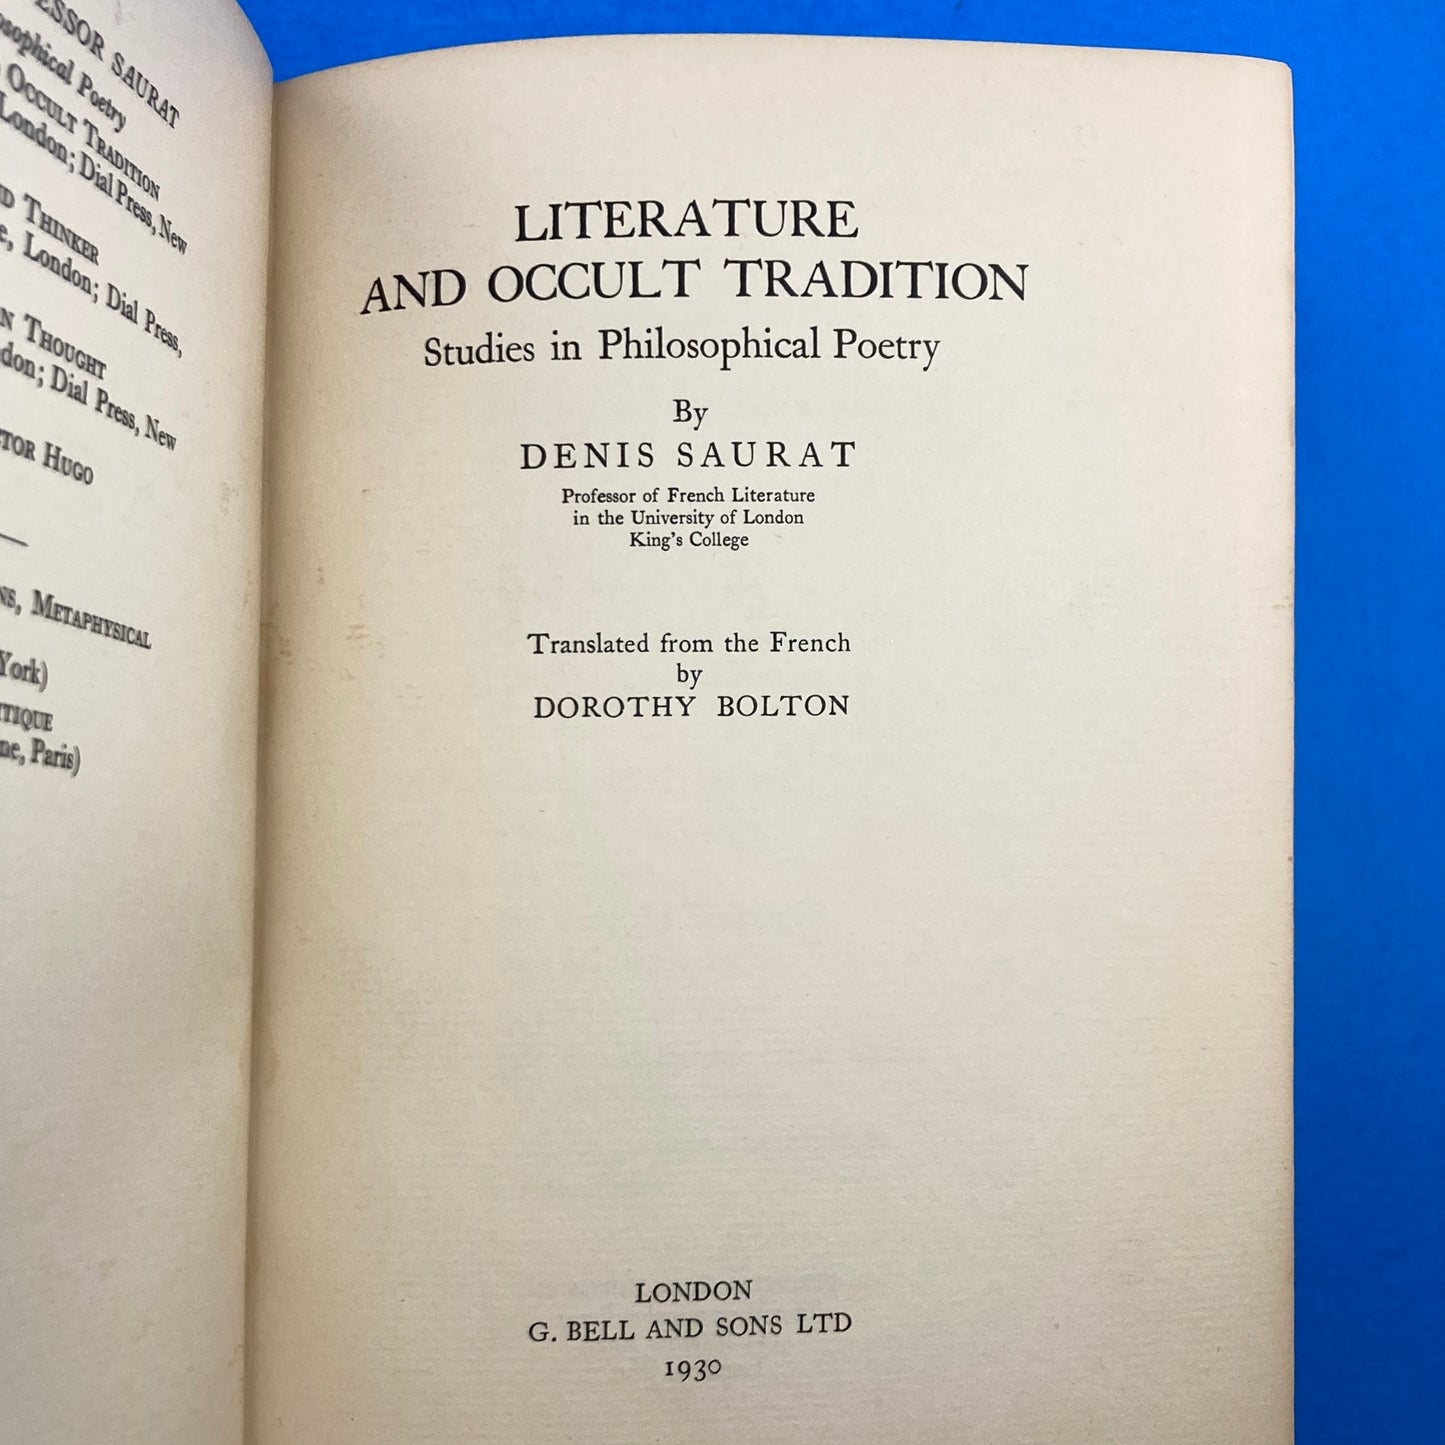 Literature and Occult Tradition: Studies in Philosophical Poetry